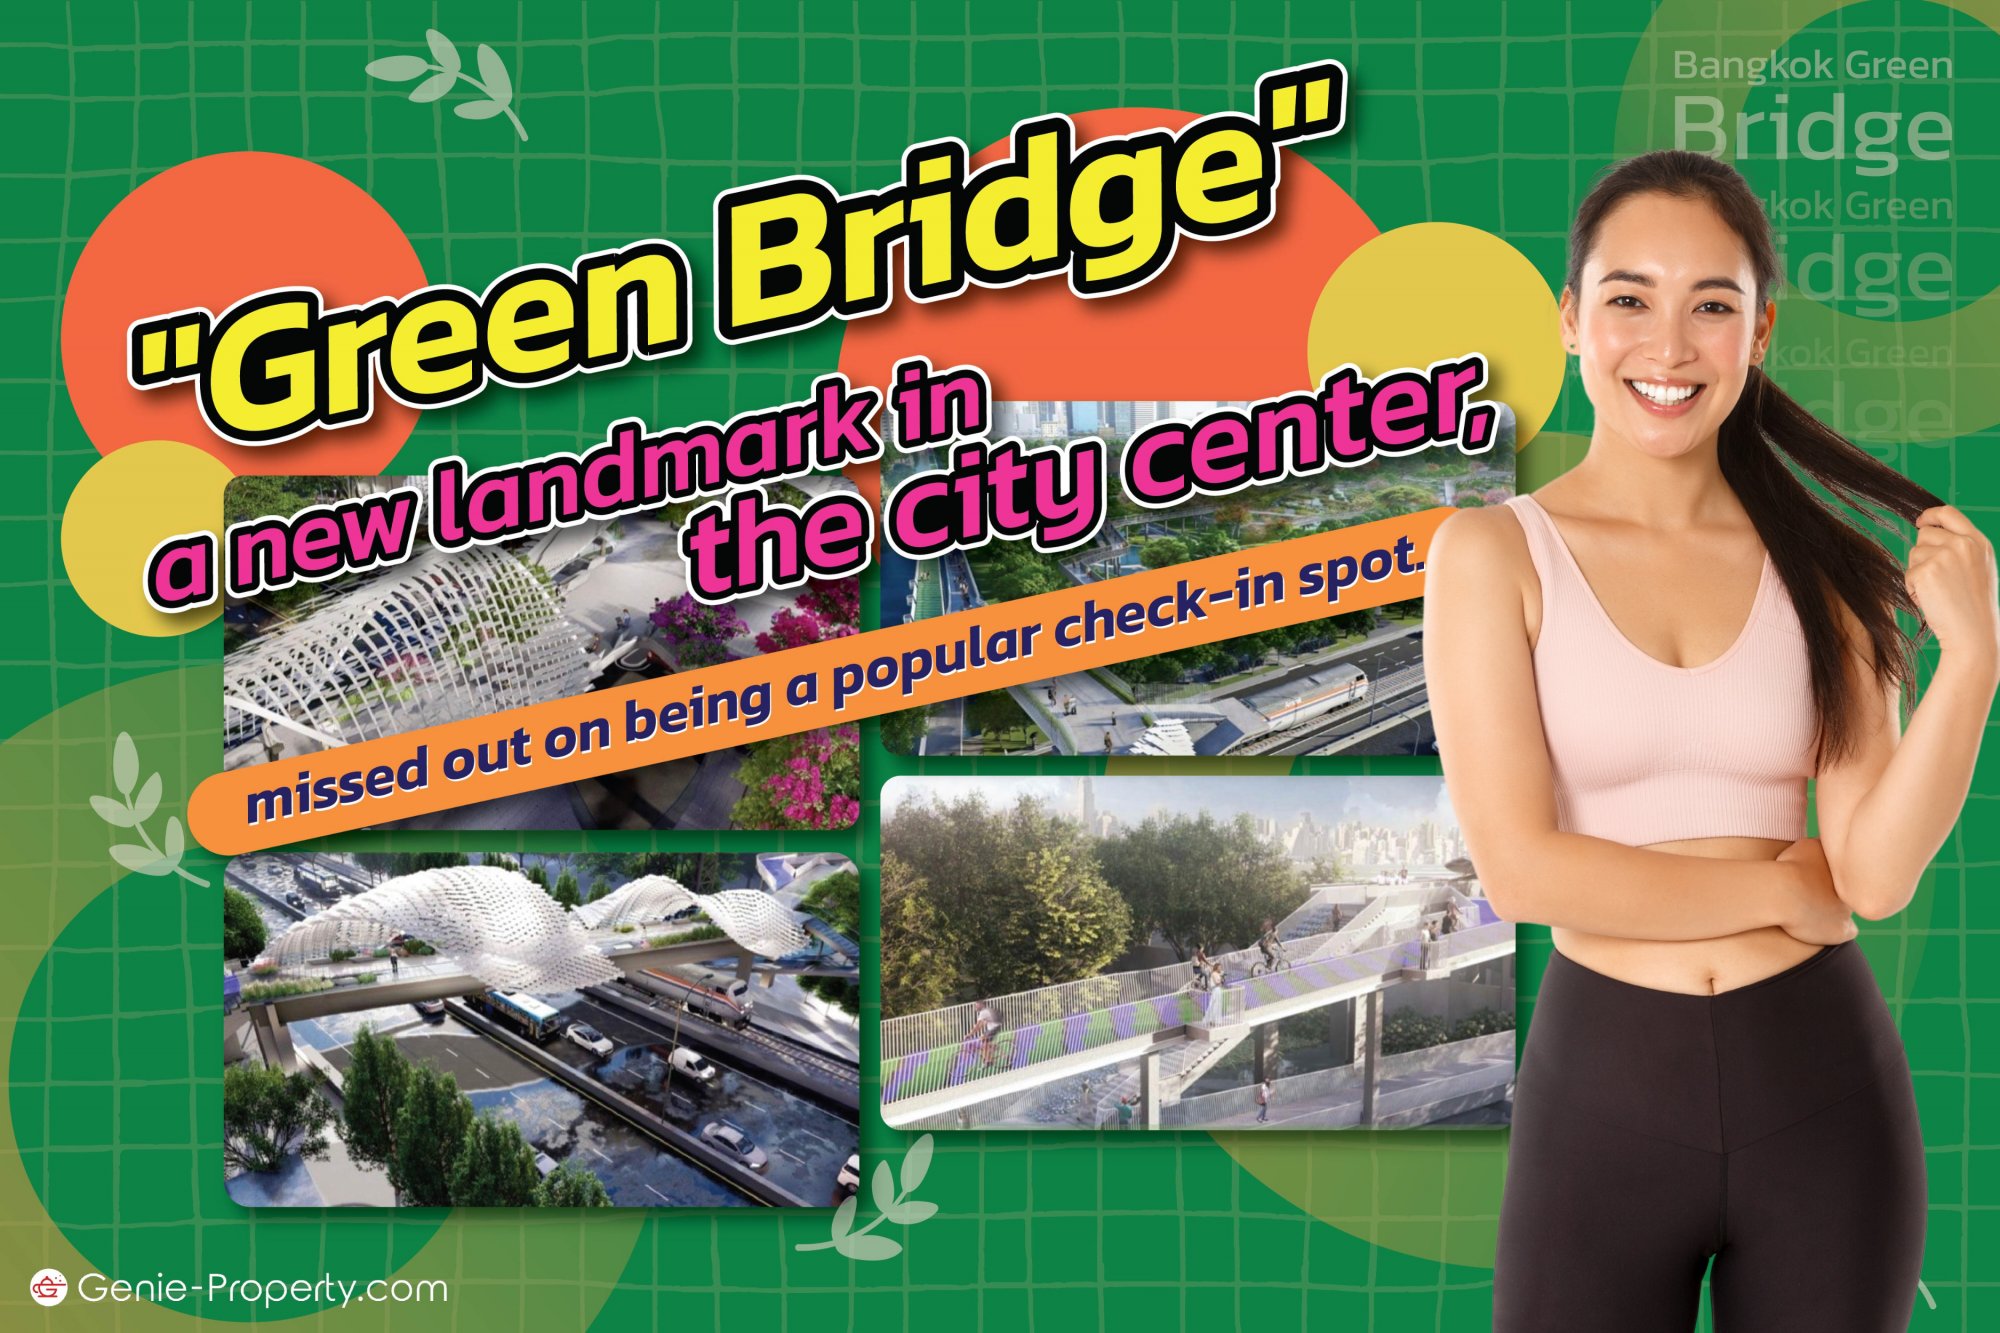 image for "Green Bridge," a new landmark in the city center, missed out on being a popular check-in spot.